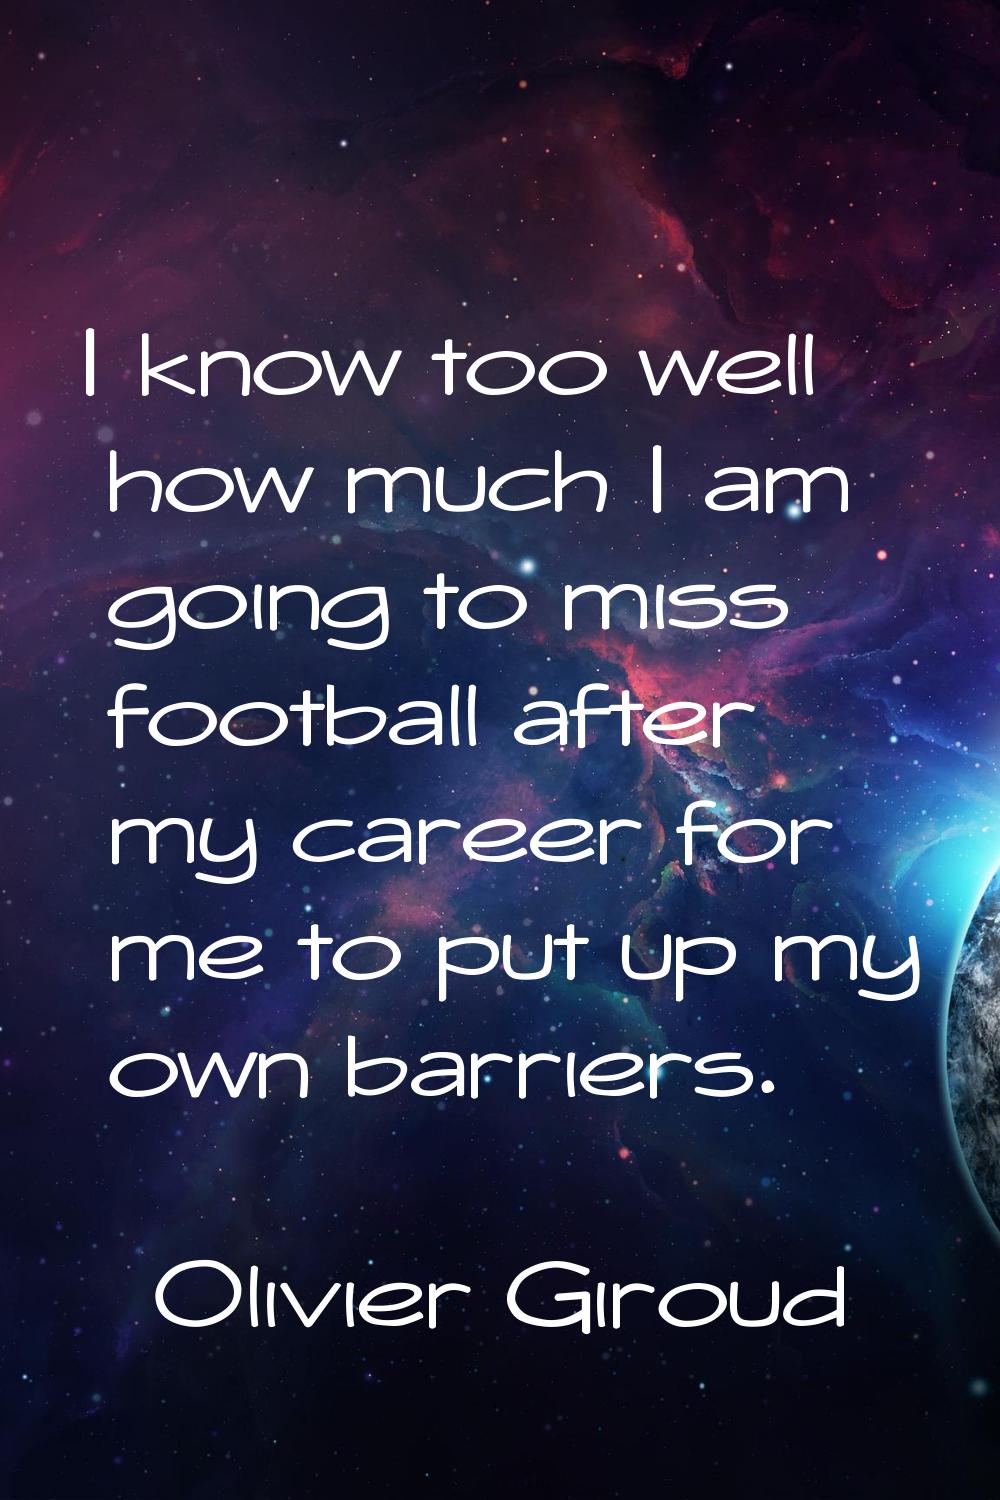 I know too well how much I am going to miss football after my career for me to put up my own barrie